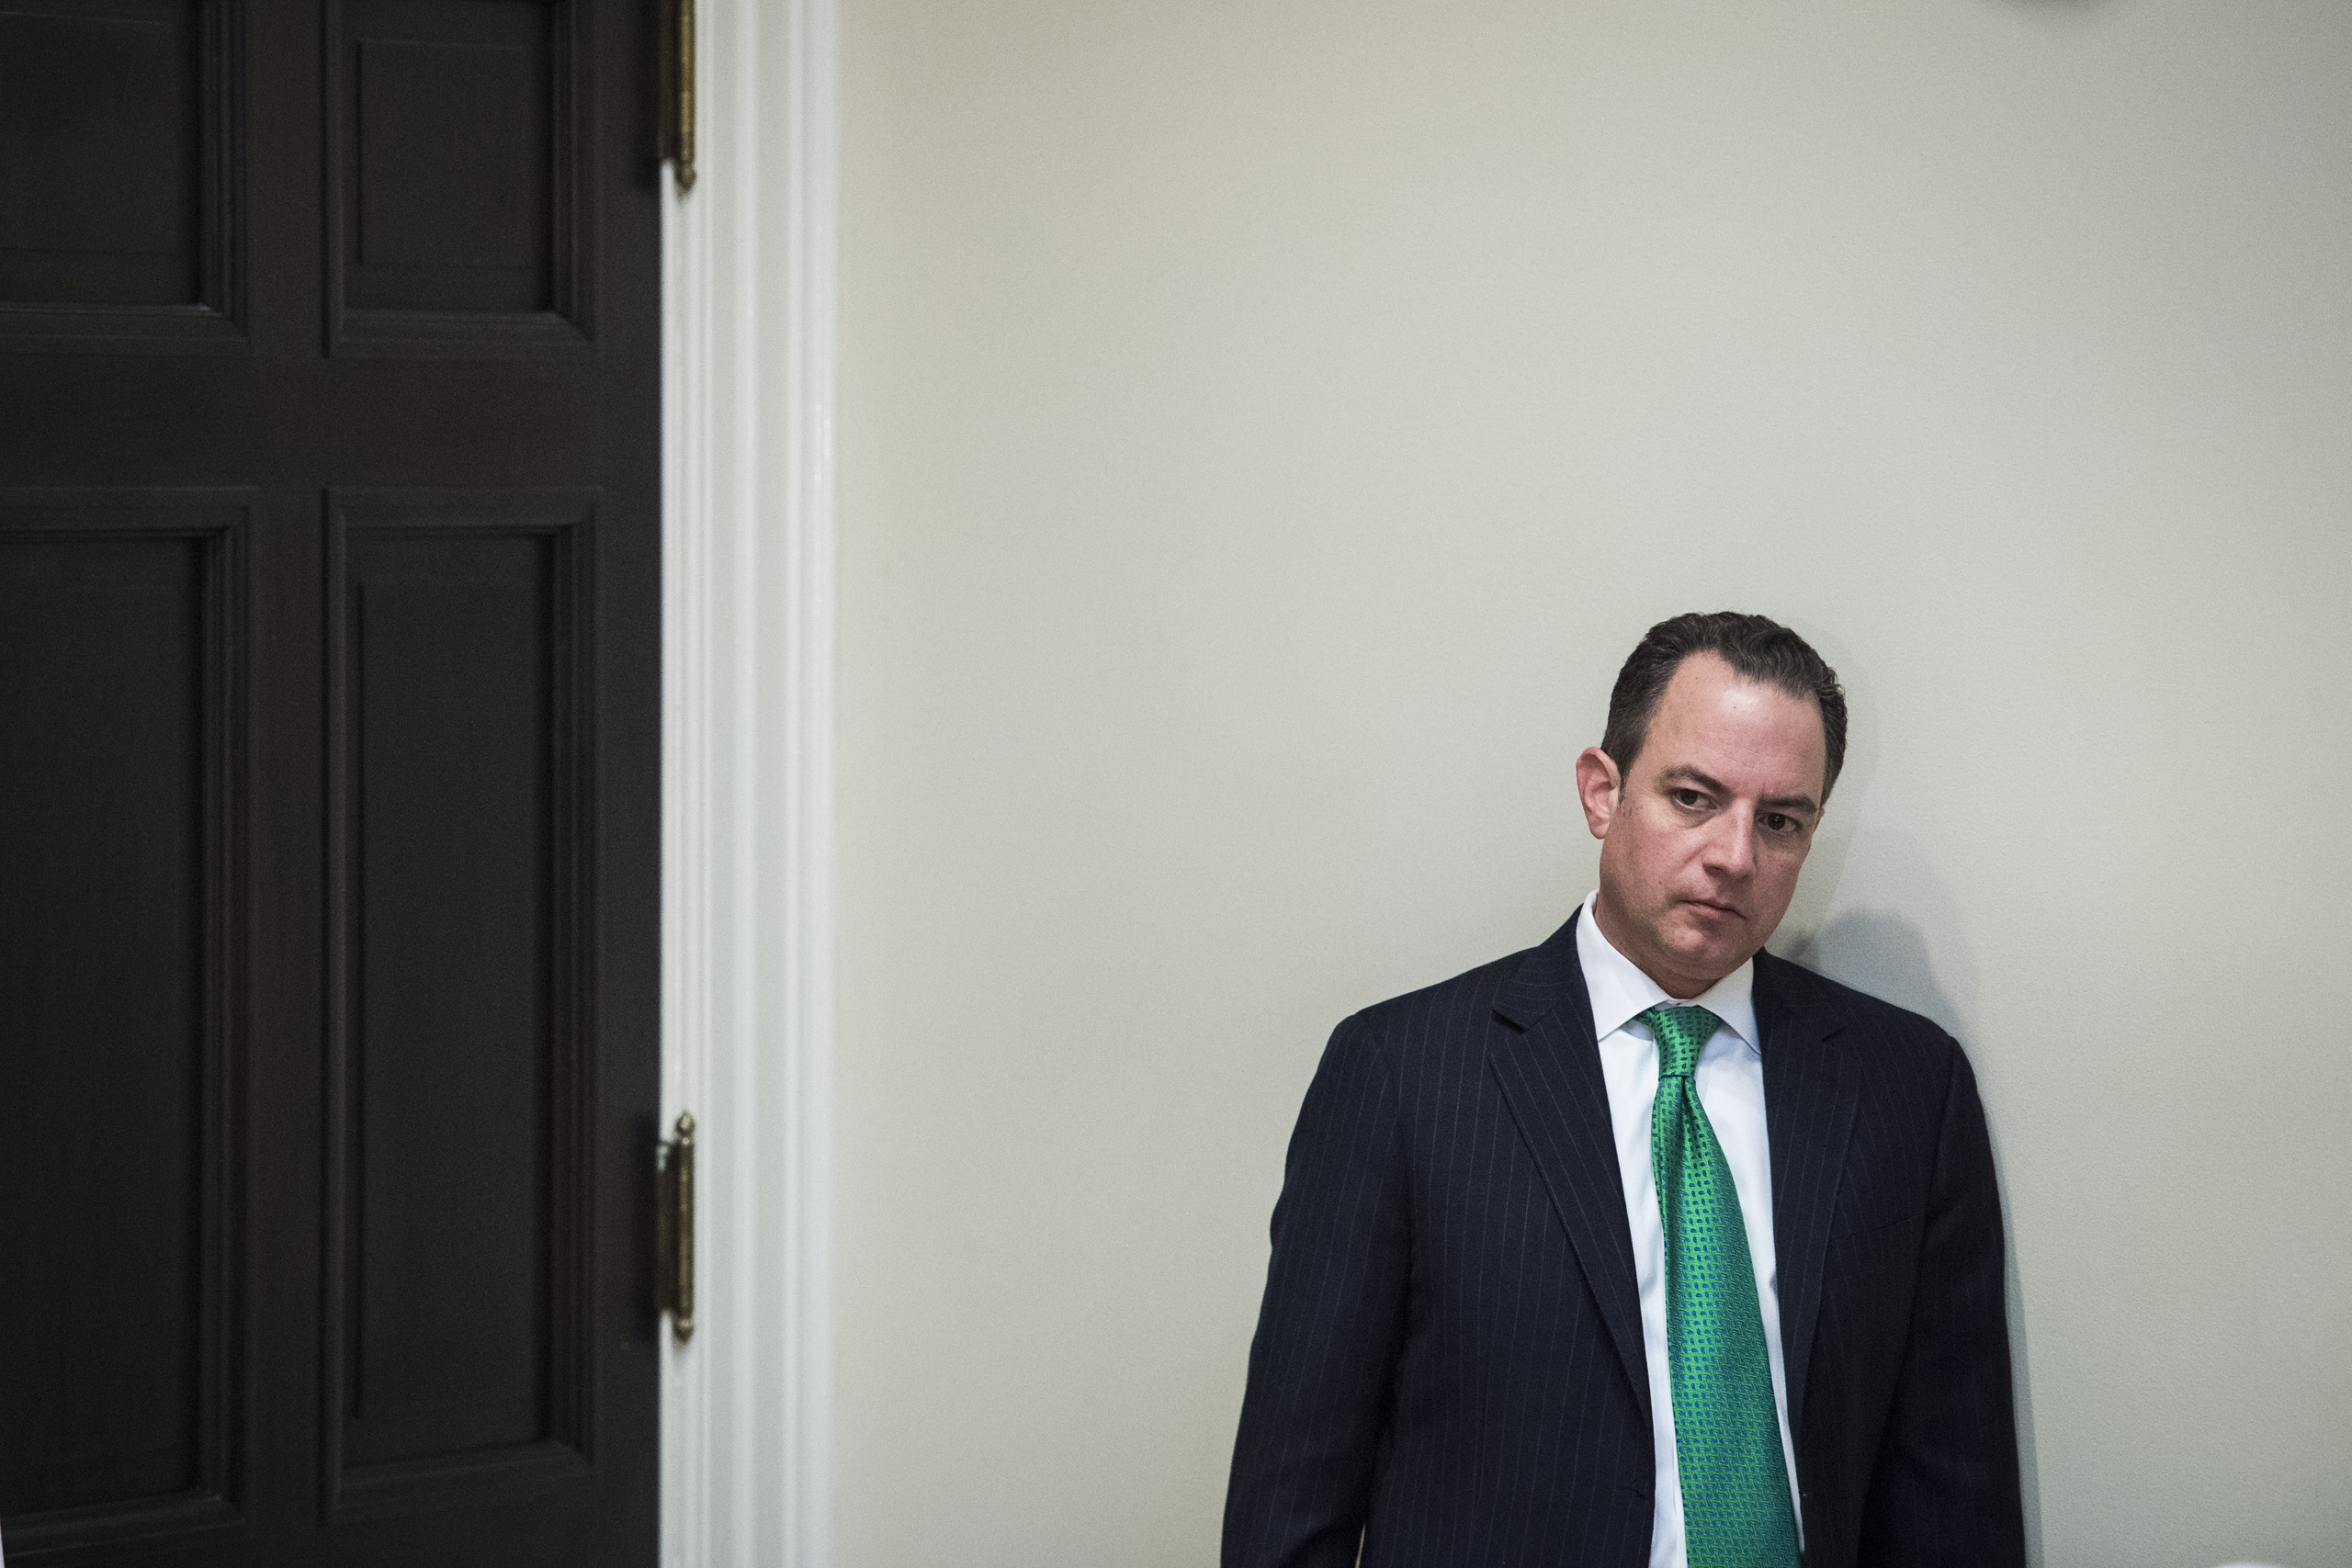 White House Chief of Staff Reince Priebus listens during a meeting with county sheriffs in the Roosevelt Room of the White House in Washington, DC on, Feb. 07, 2017. (Jabin Botsford—The Washington Post/Getty Images)